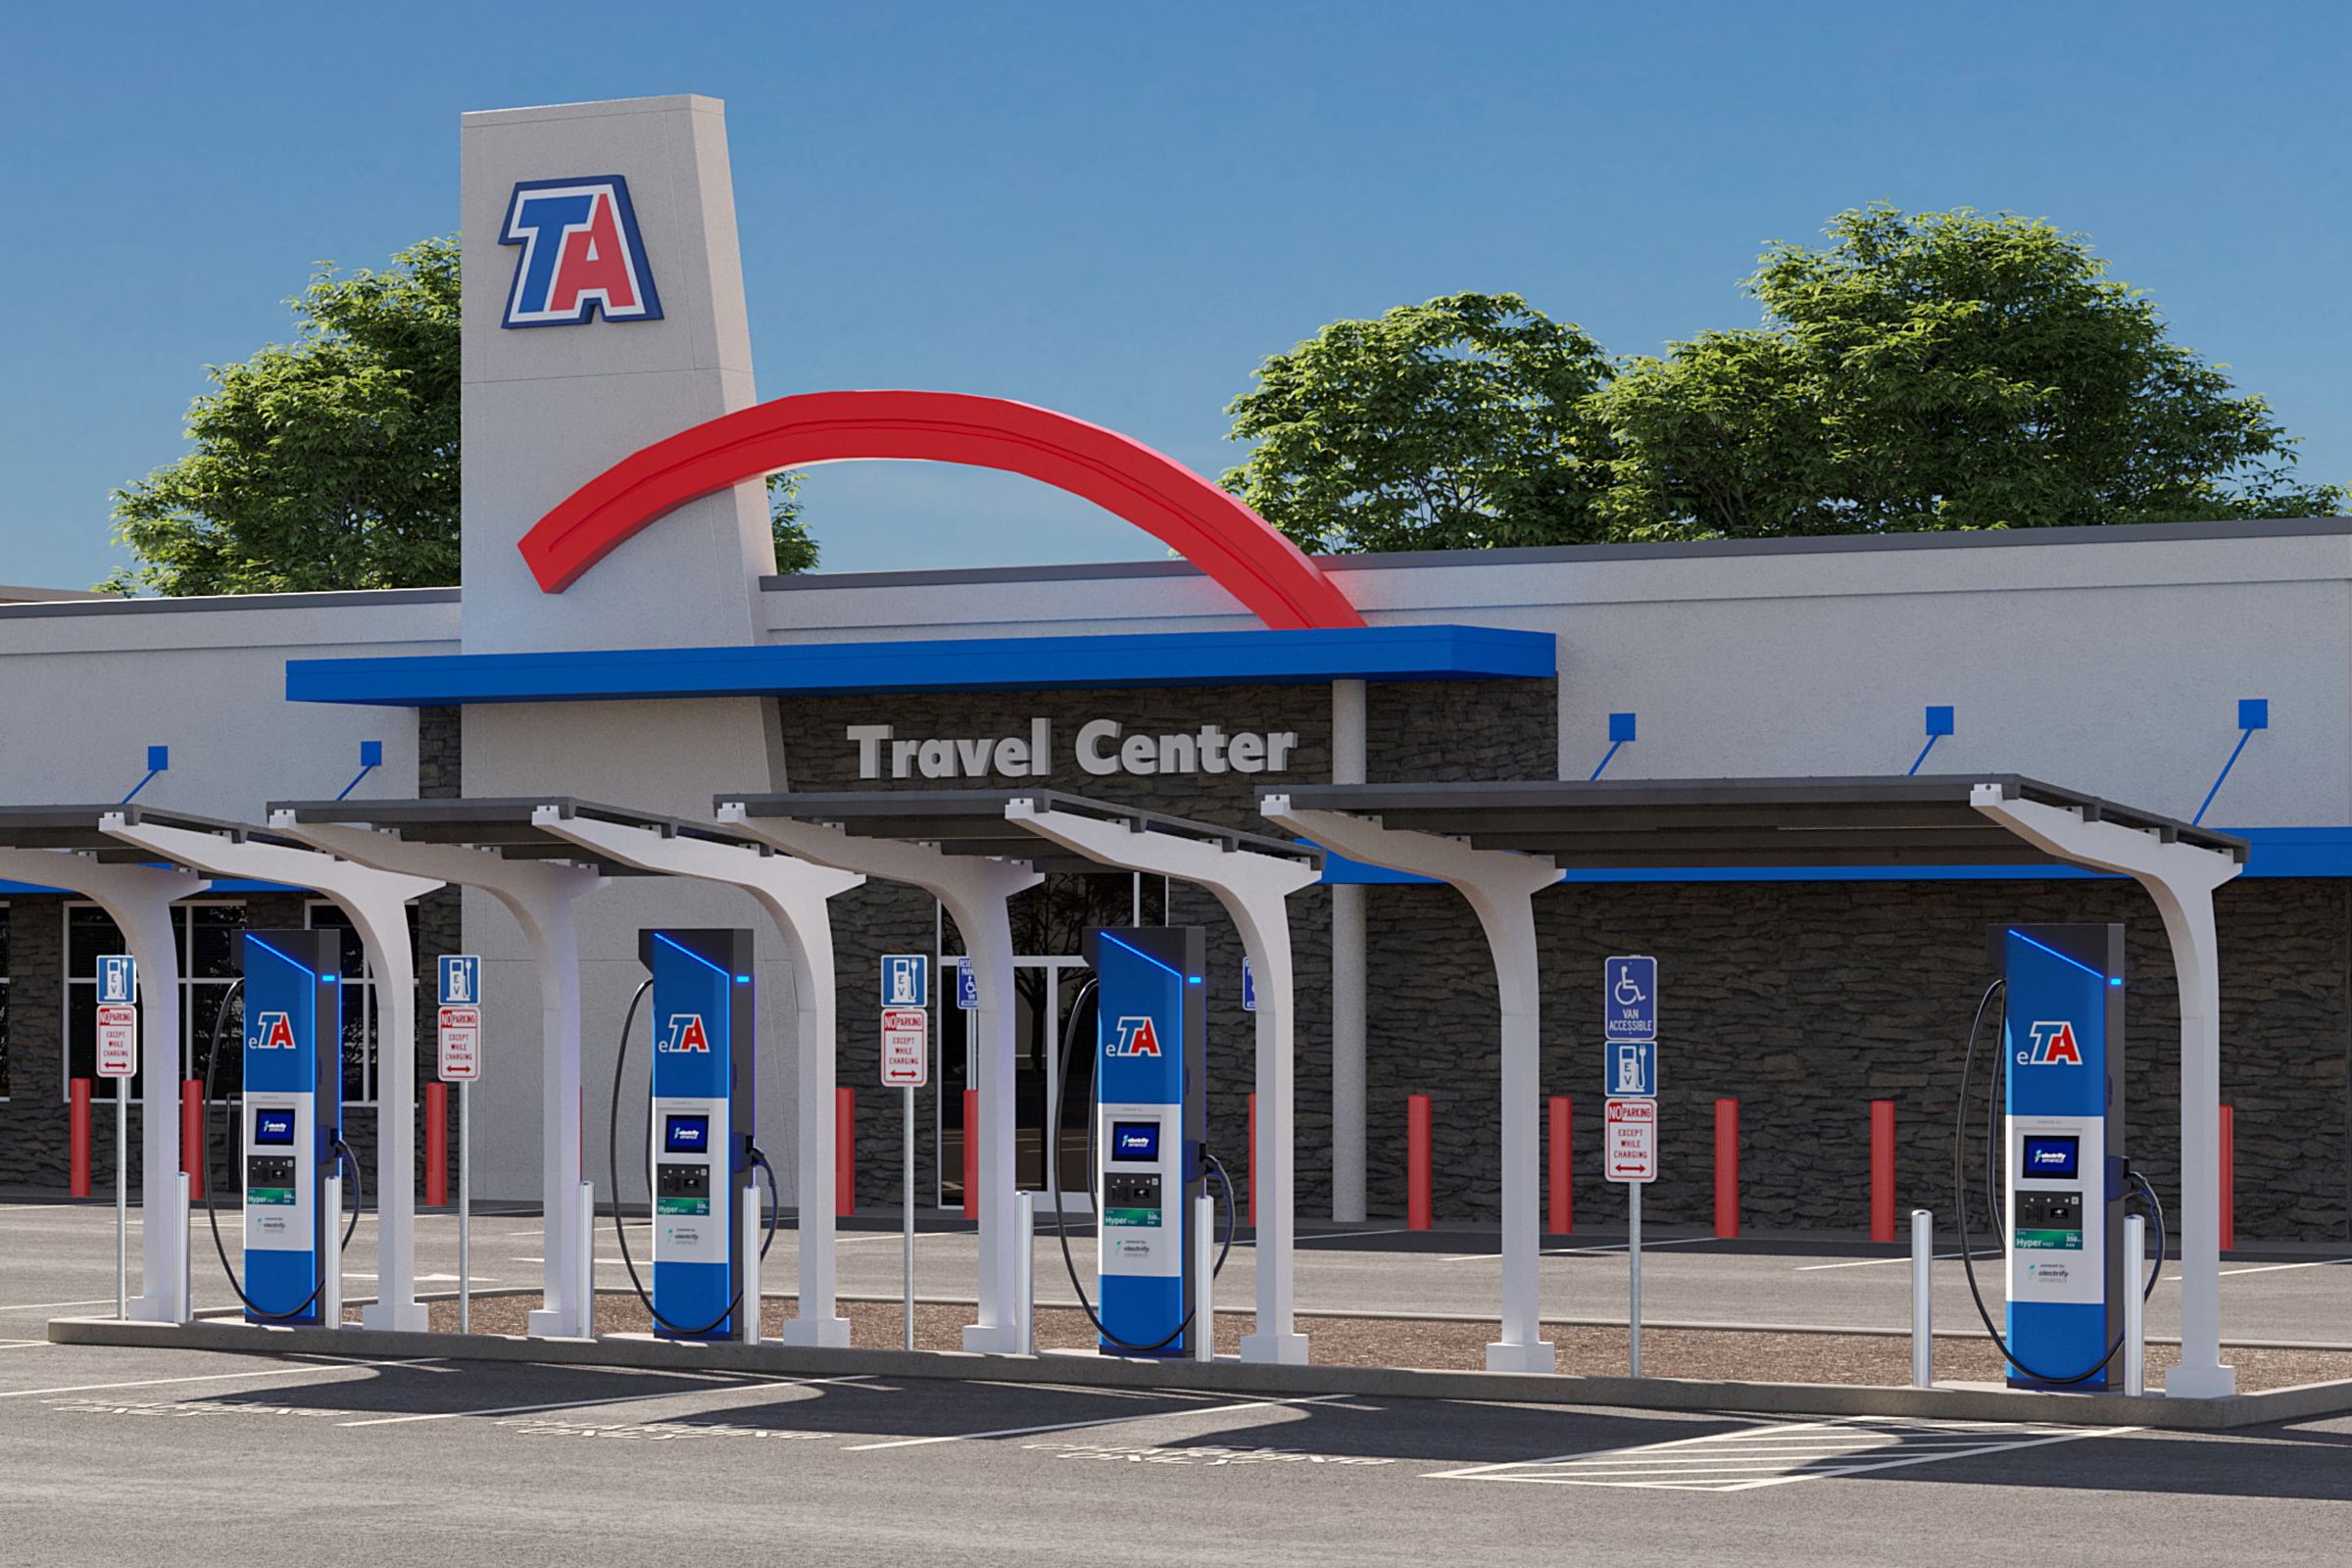 This TravelCenters of America 3D rendering shows a rest stop location with four EV charging stalls lined up in front of the building. the parking lot is empty.